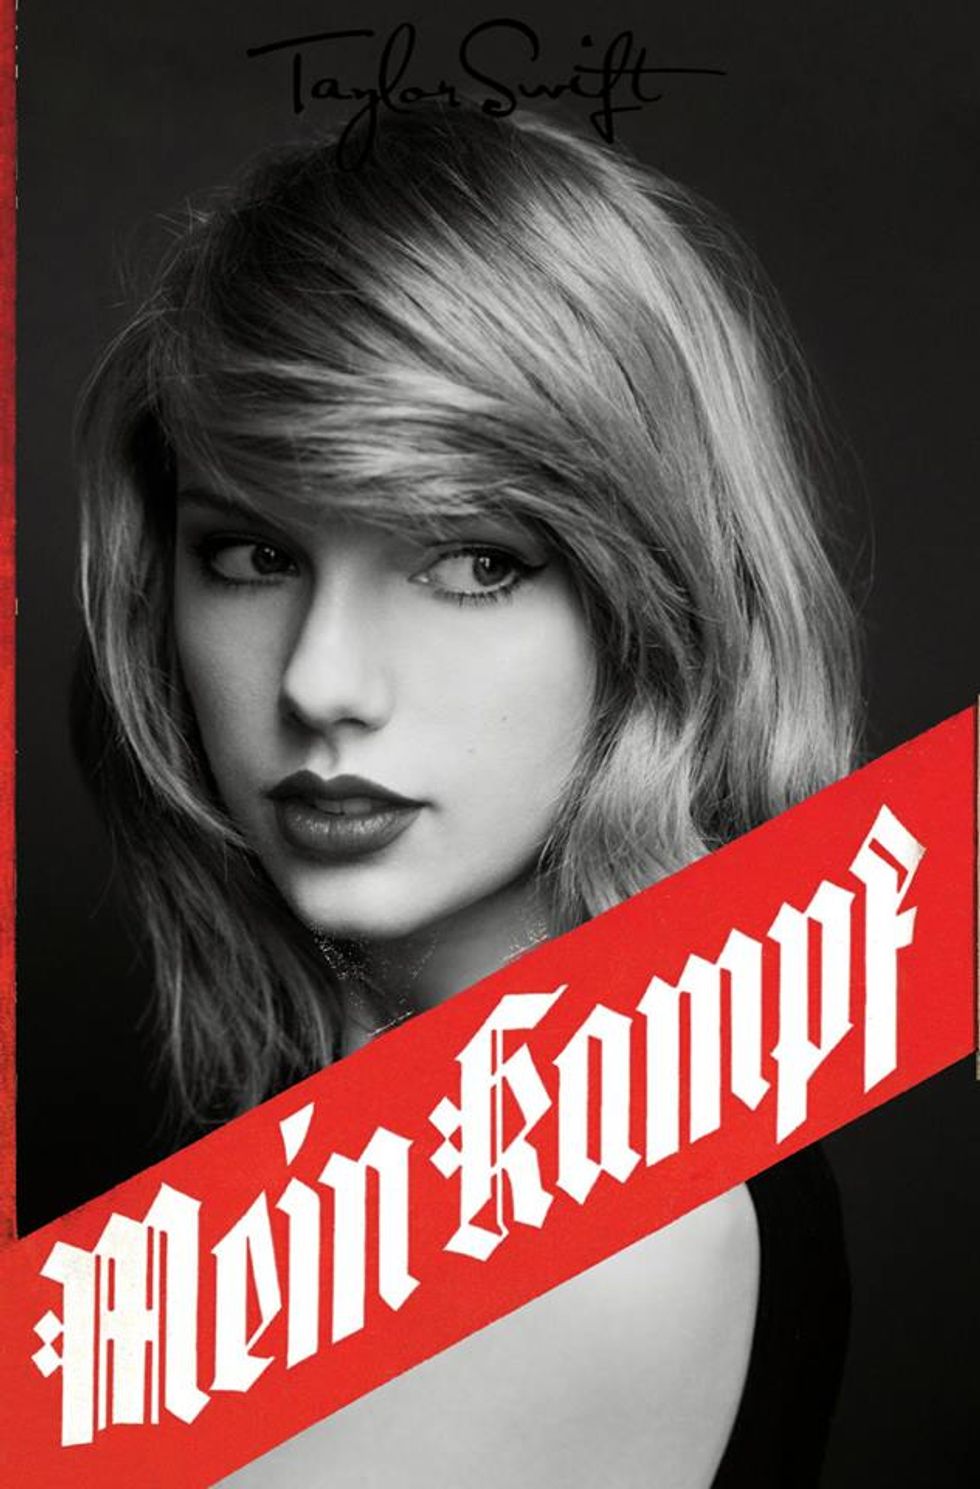 Oh Great, Taylor Swift Is Literally Hitler Now